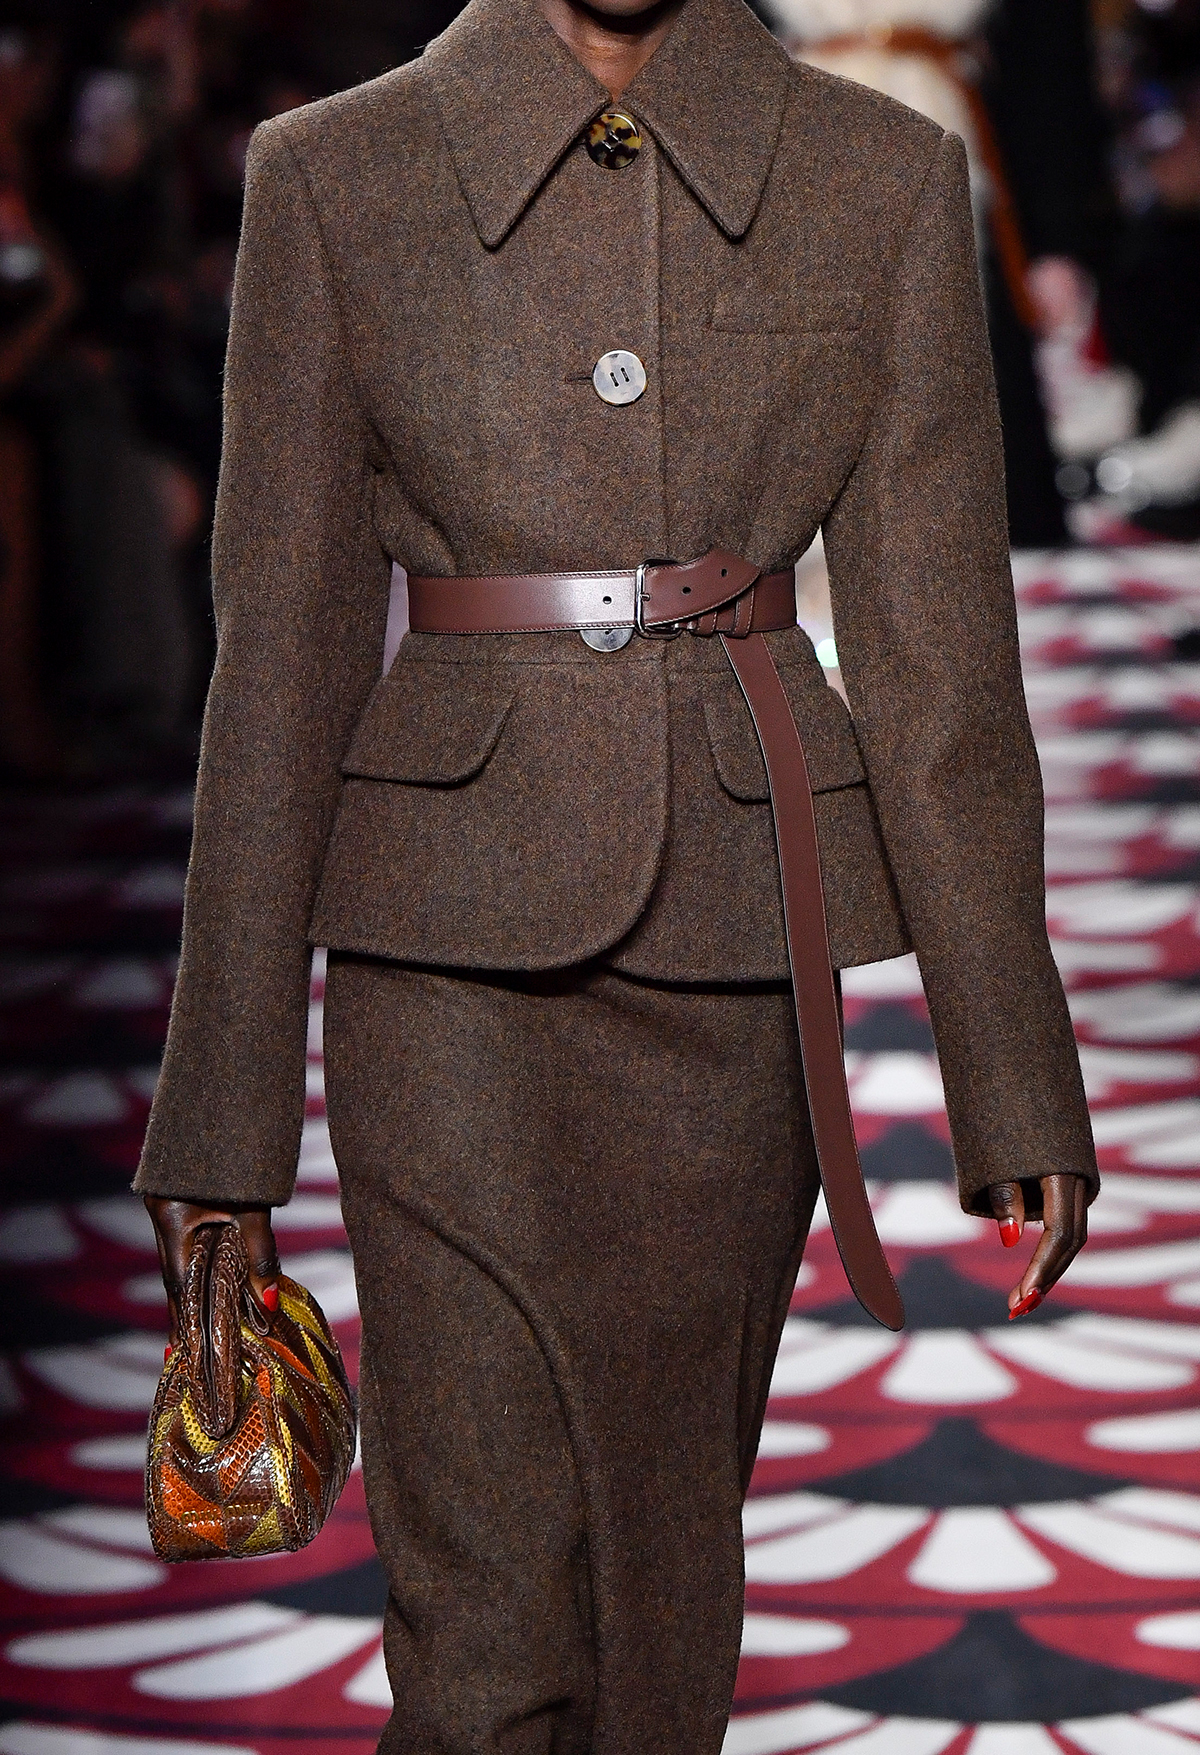 Autumn winter 2020 fashion trends: Michael Kors belted jacket